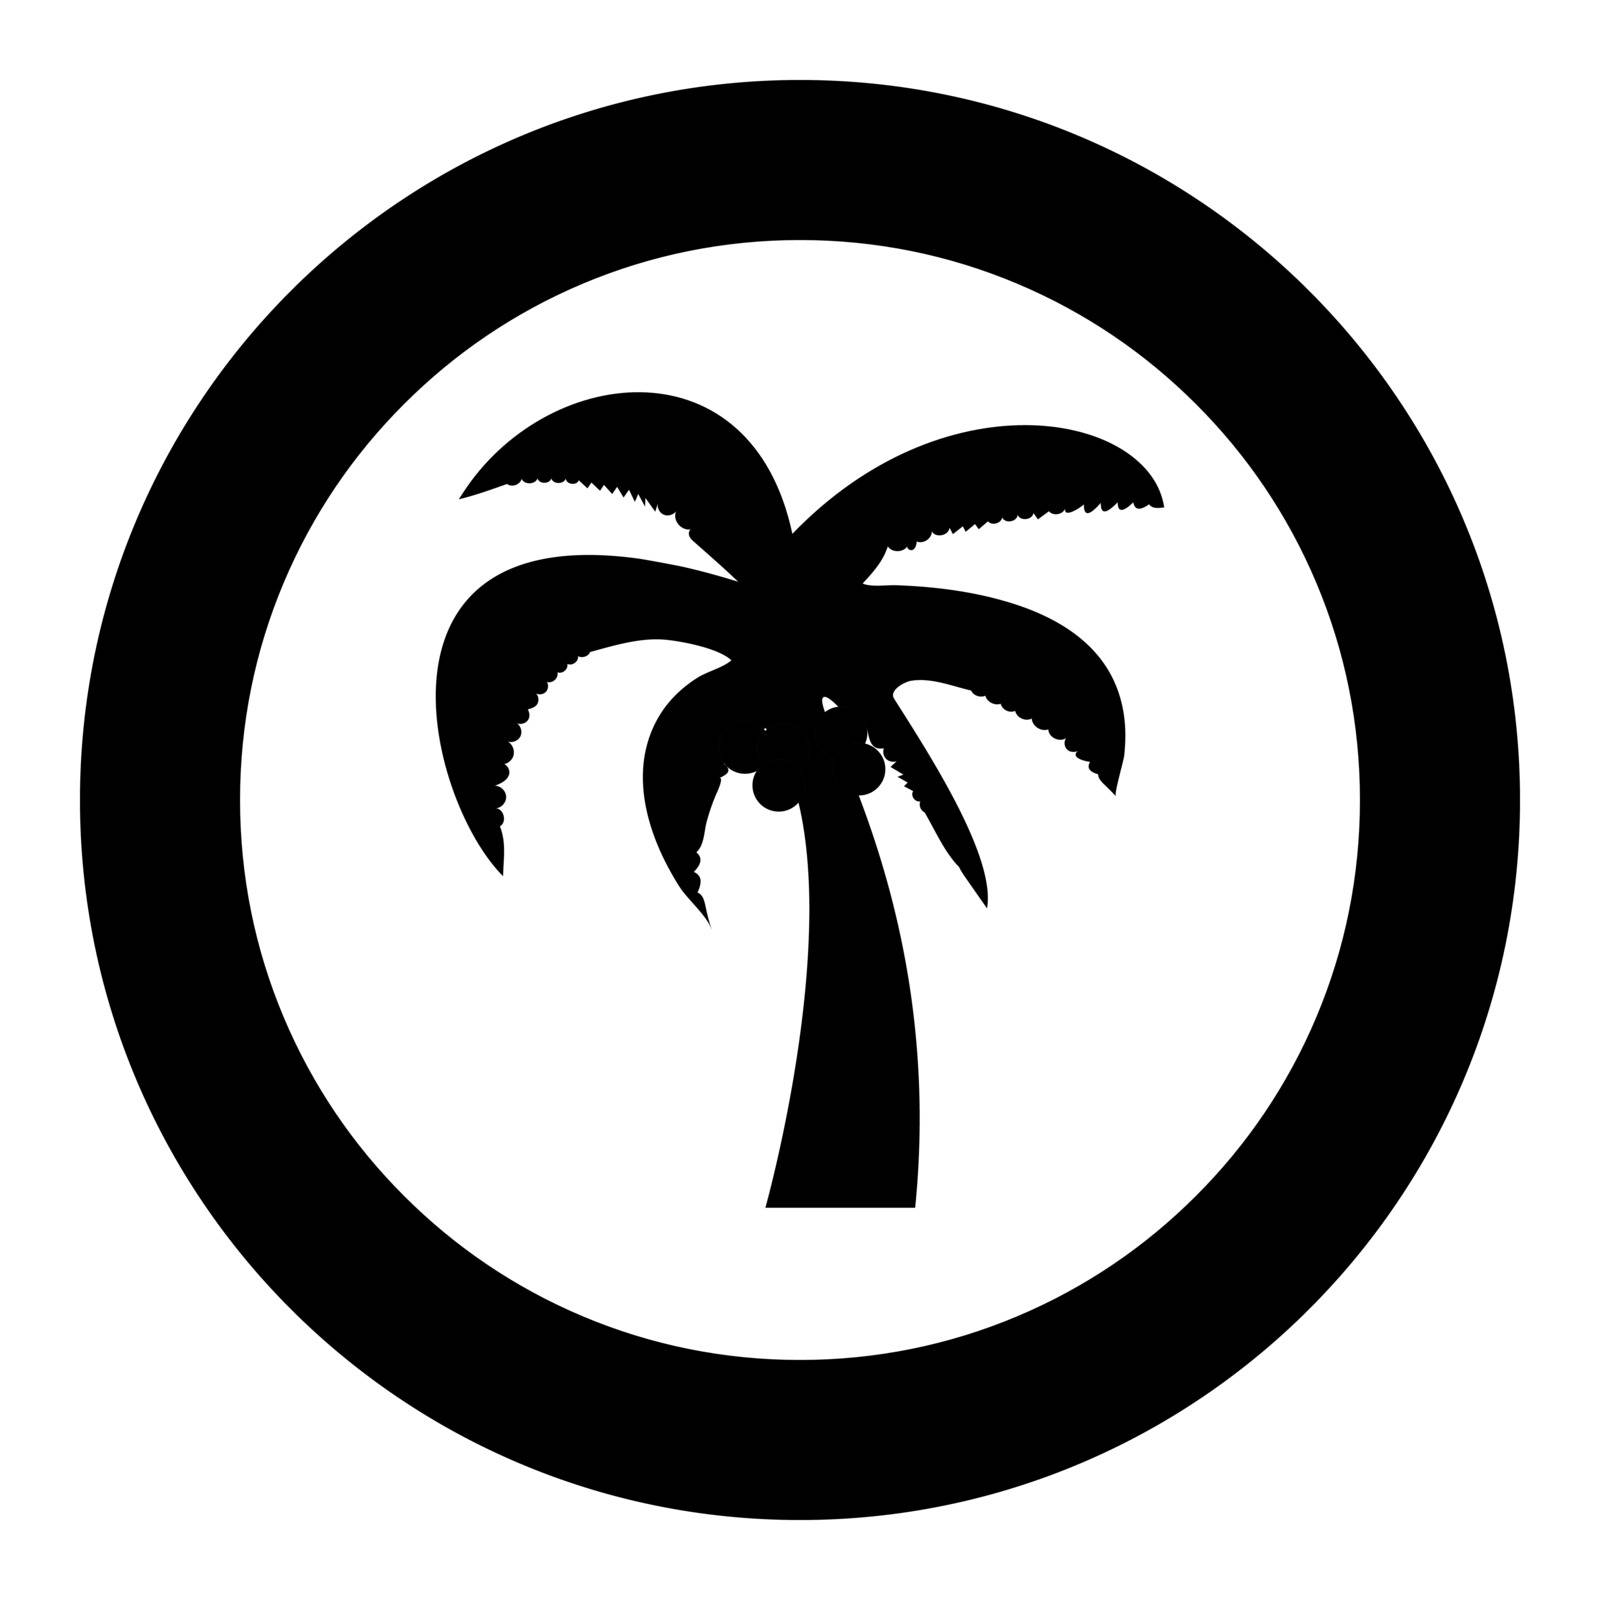 Palm icon black color in circle or round vector illustration